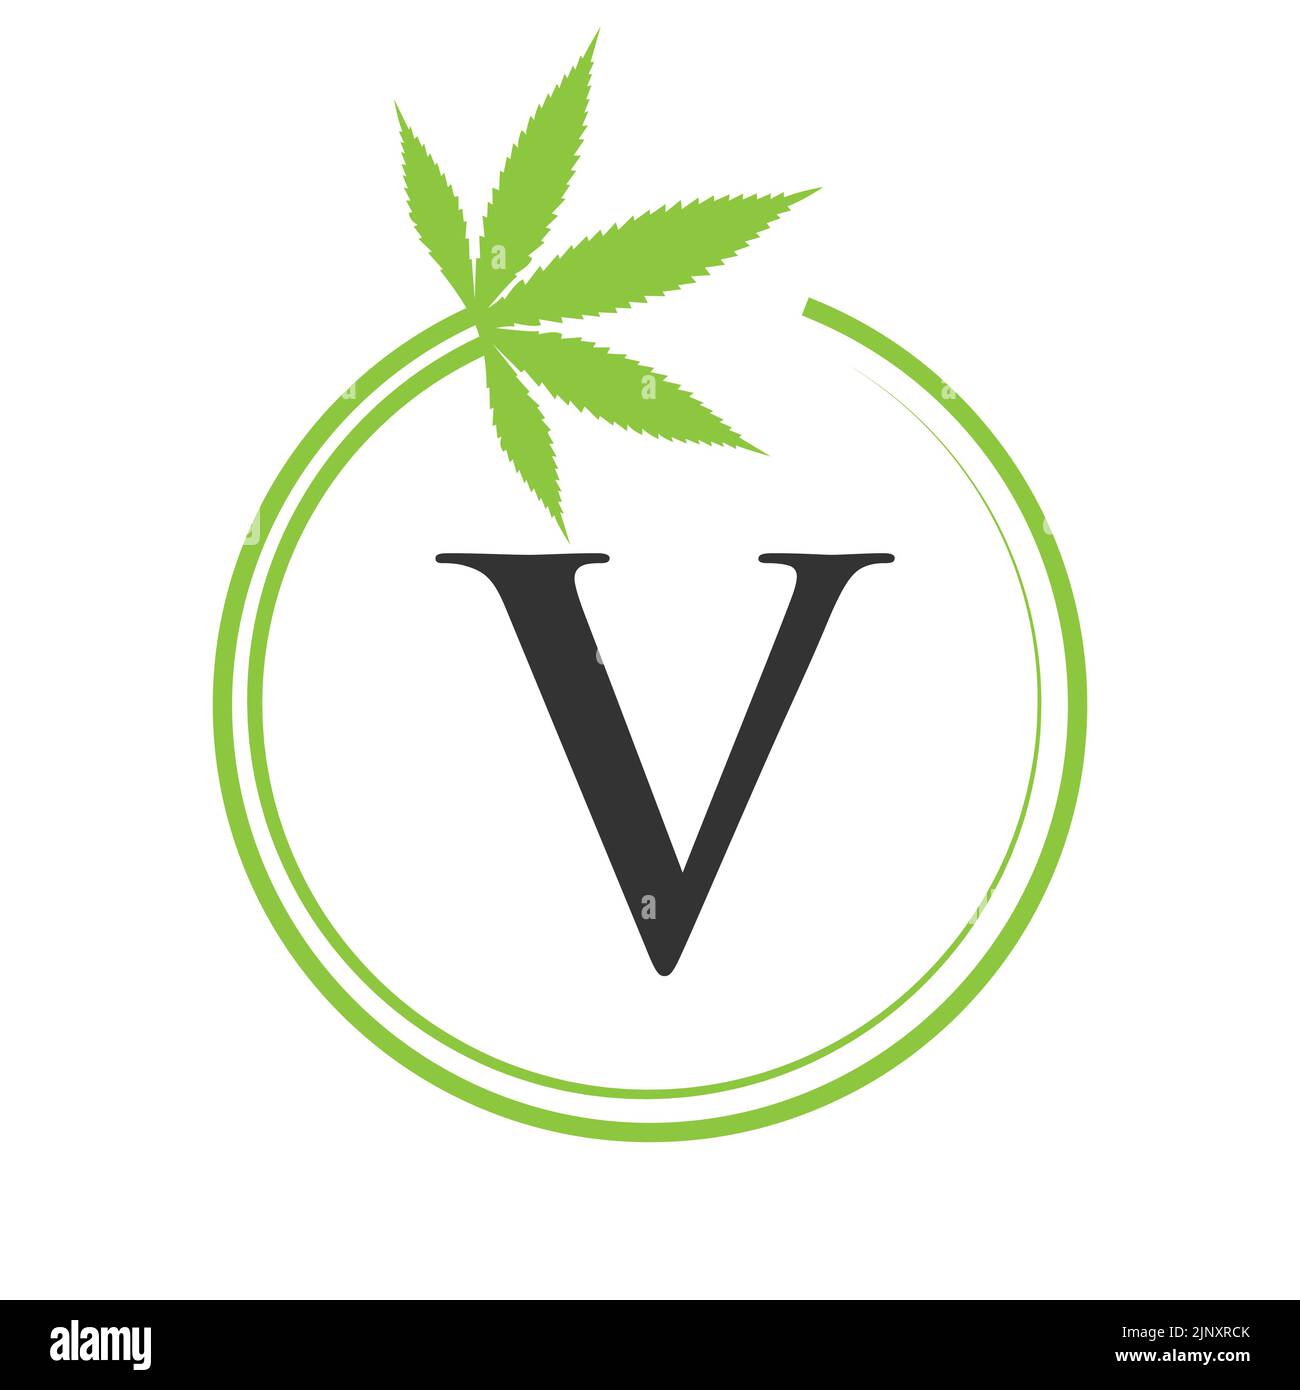 Cannabis Marijuana Logo on Letter V Concept For Health and Medical Therapy. Marijuana, Cannabis Sign Template Stock Vector